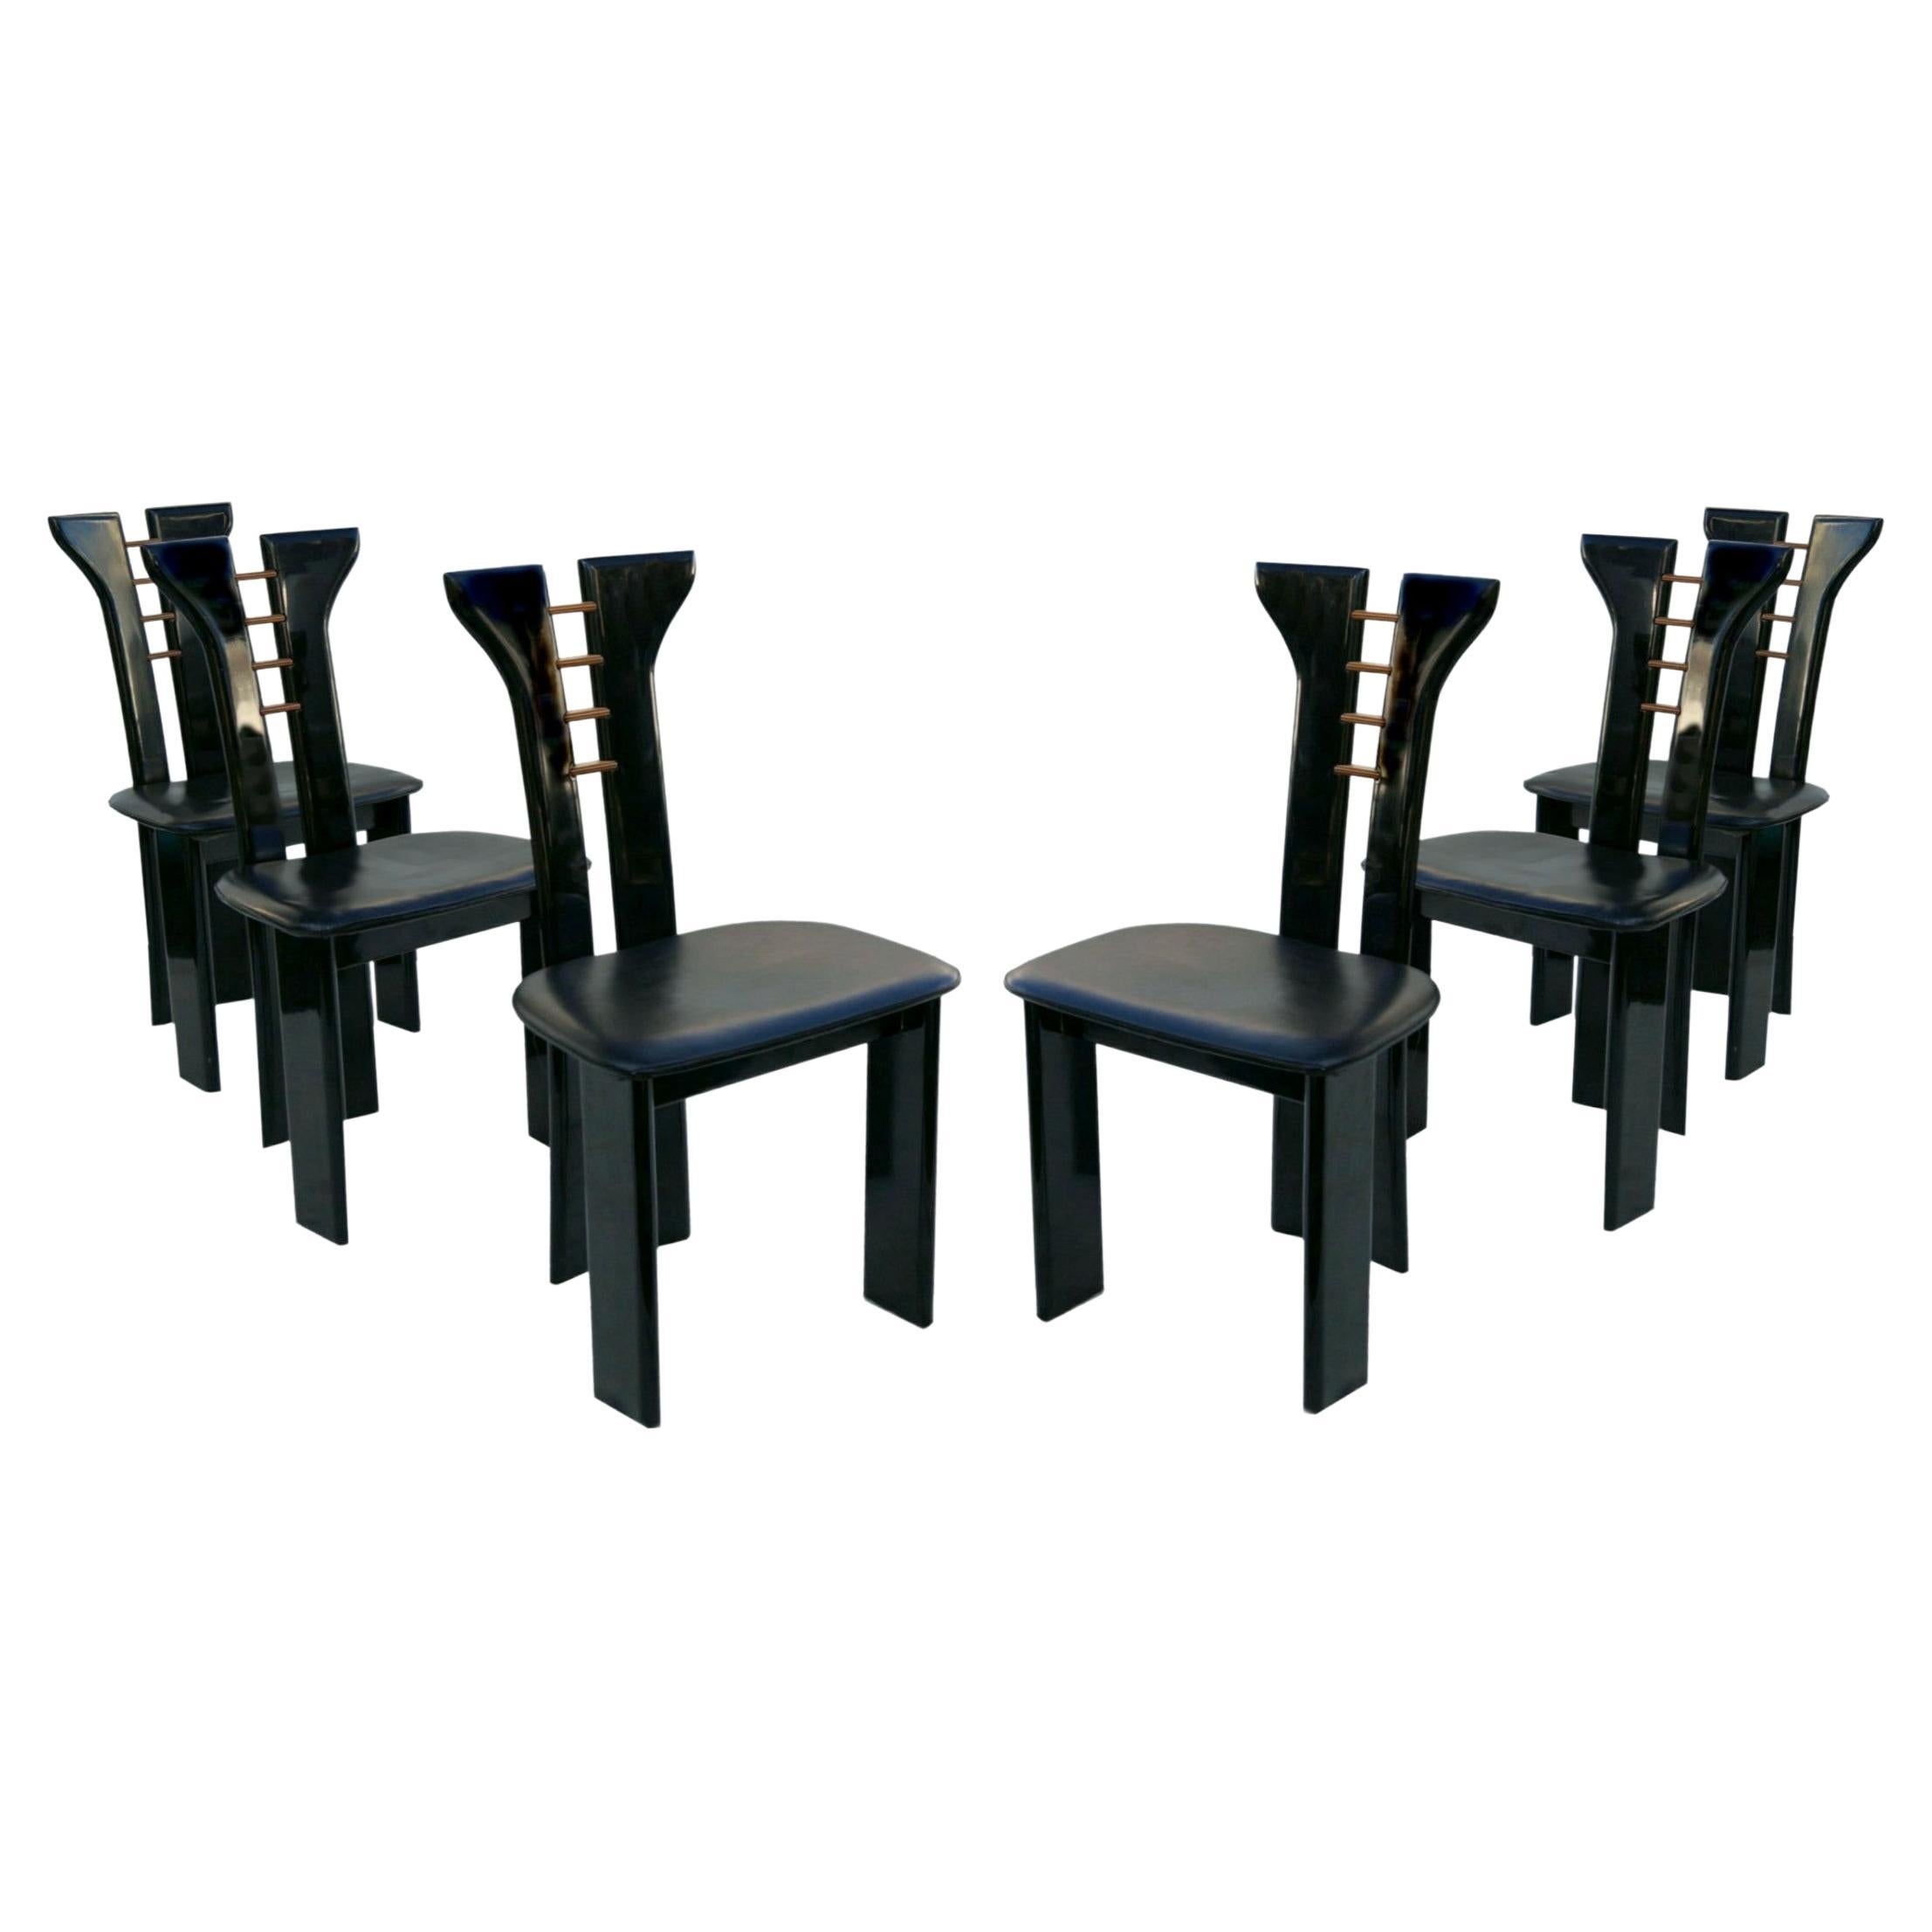 6 Pierre Cardin Roche Bobois Italian Black Lacquer Dining Room Conference Chairs For Sale